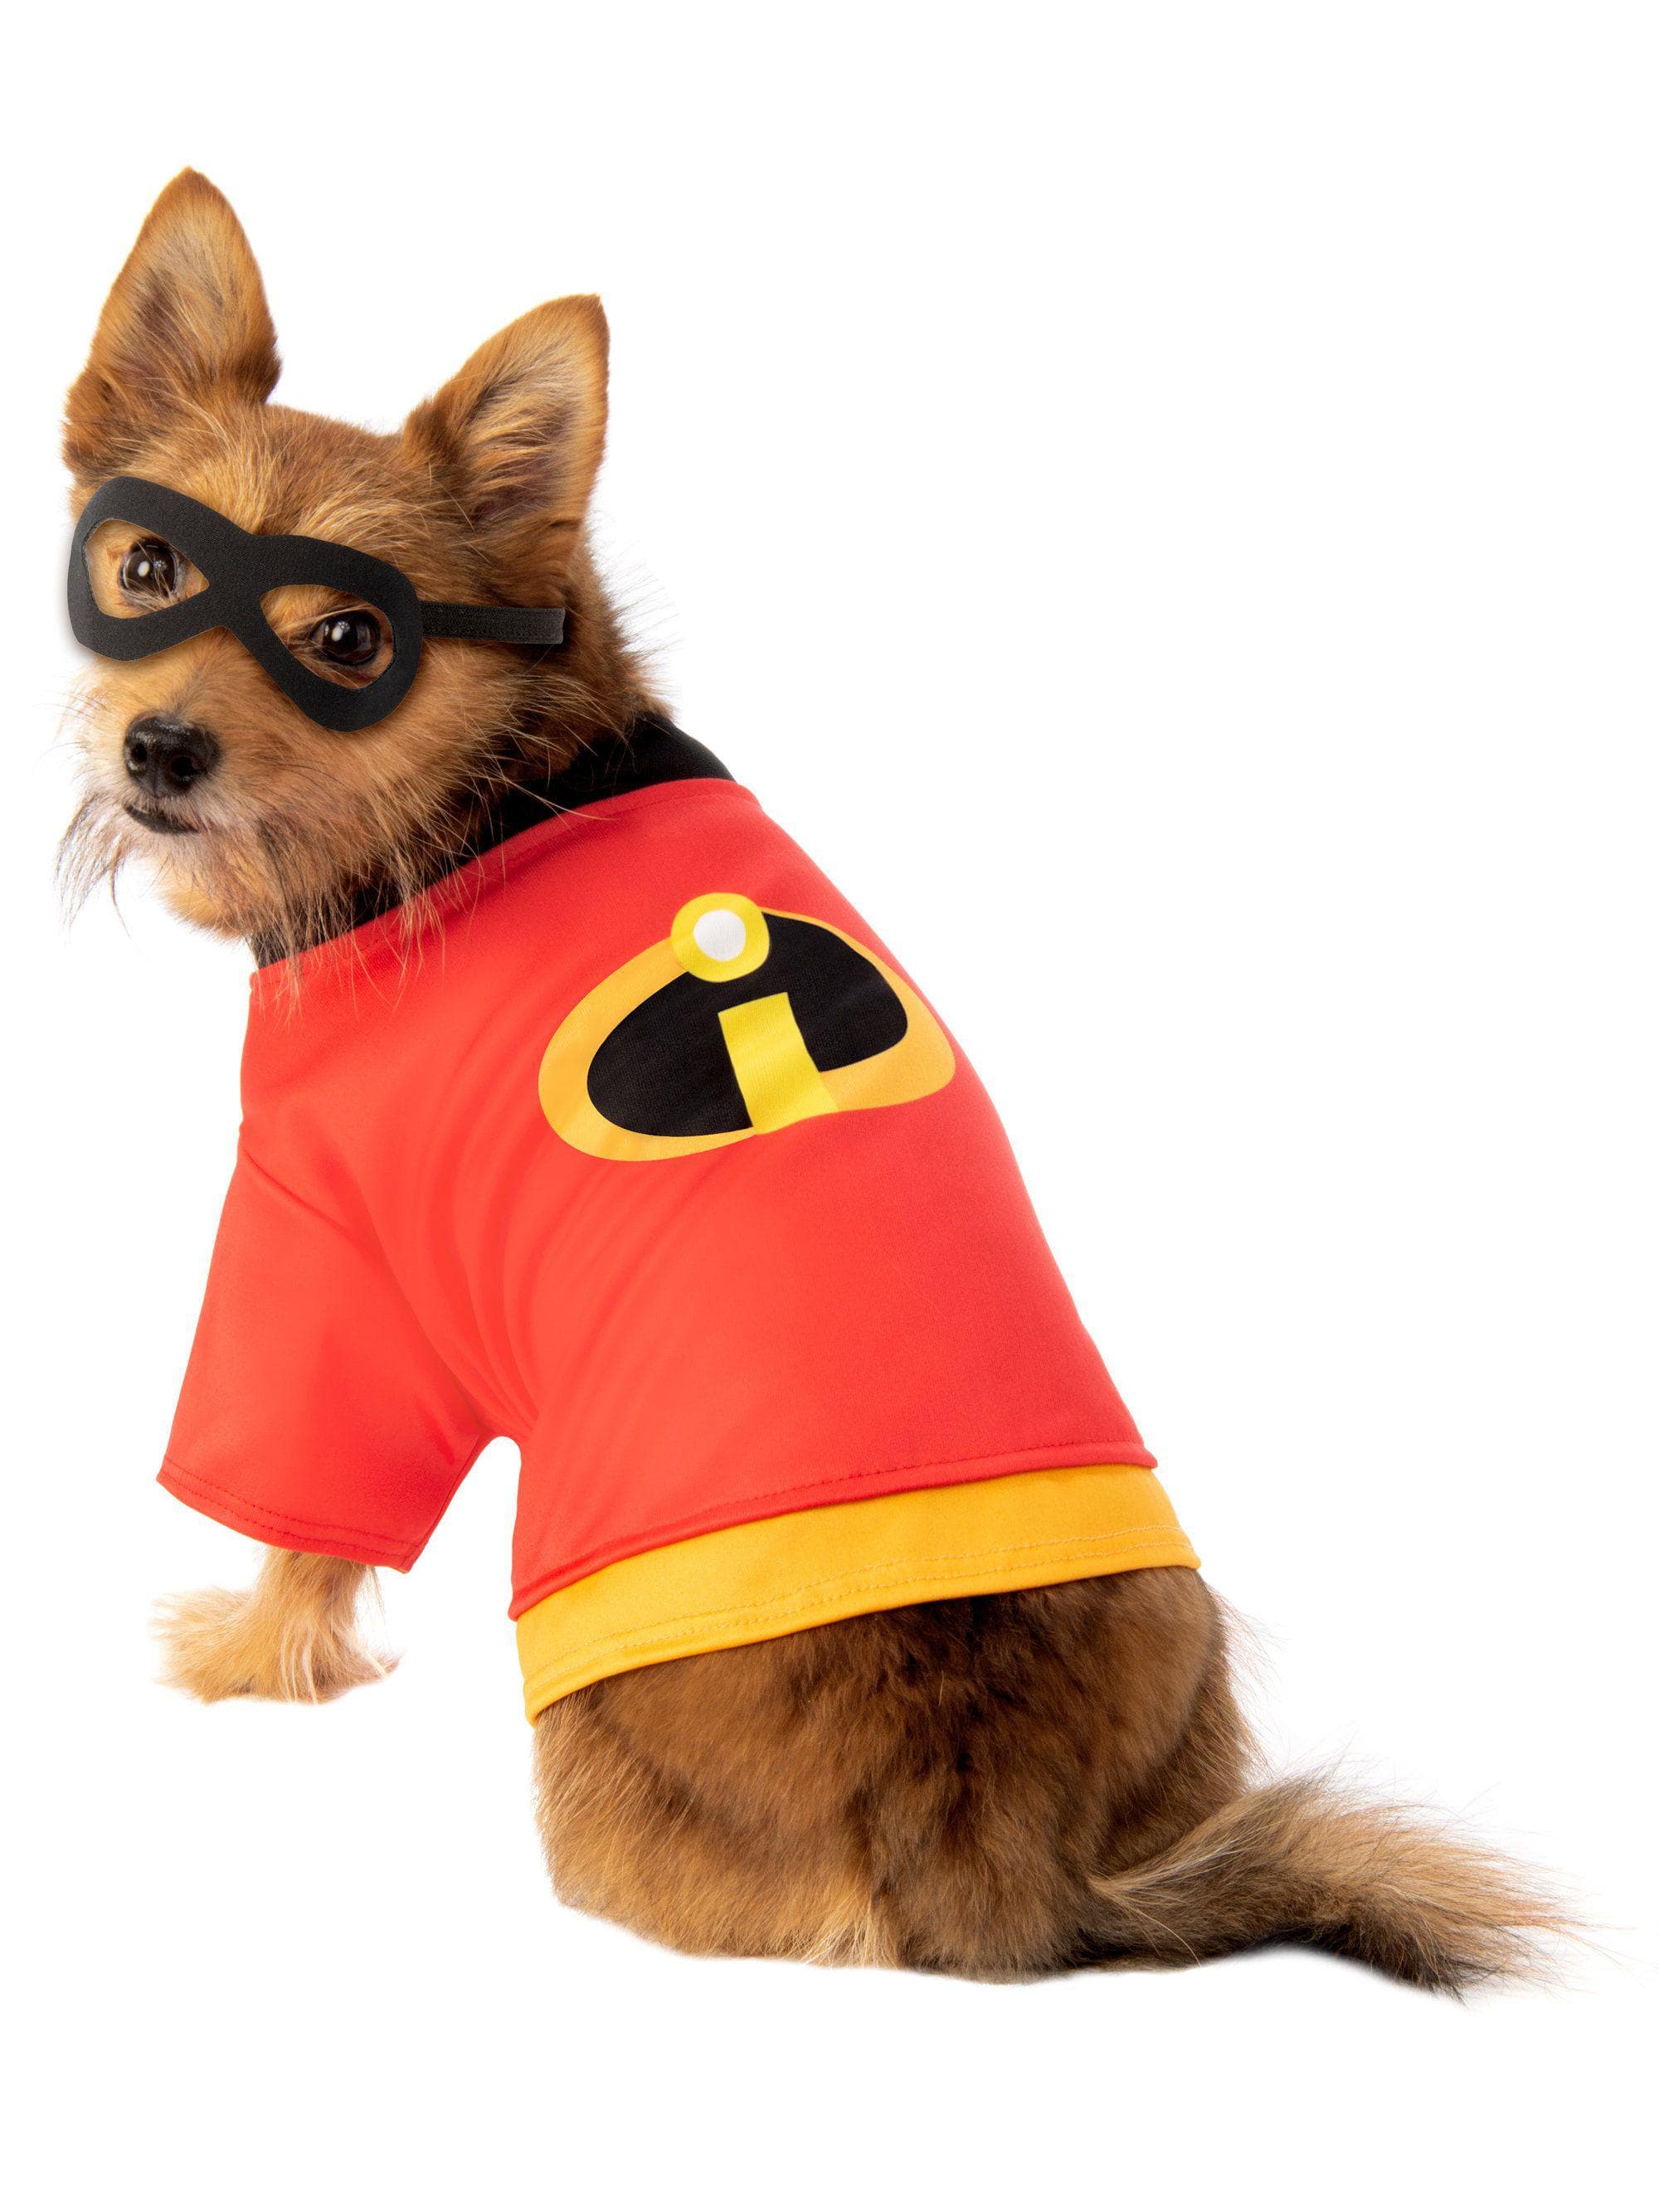 The Incredibles Pet T-Shirt and Mask - costumes.com